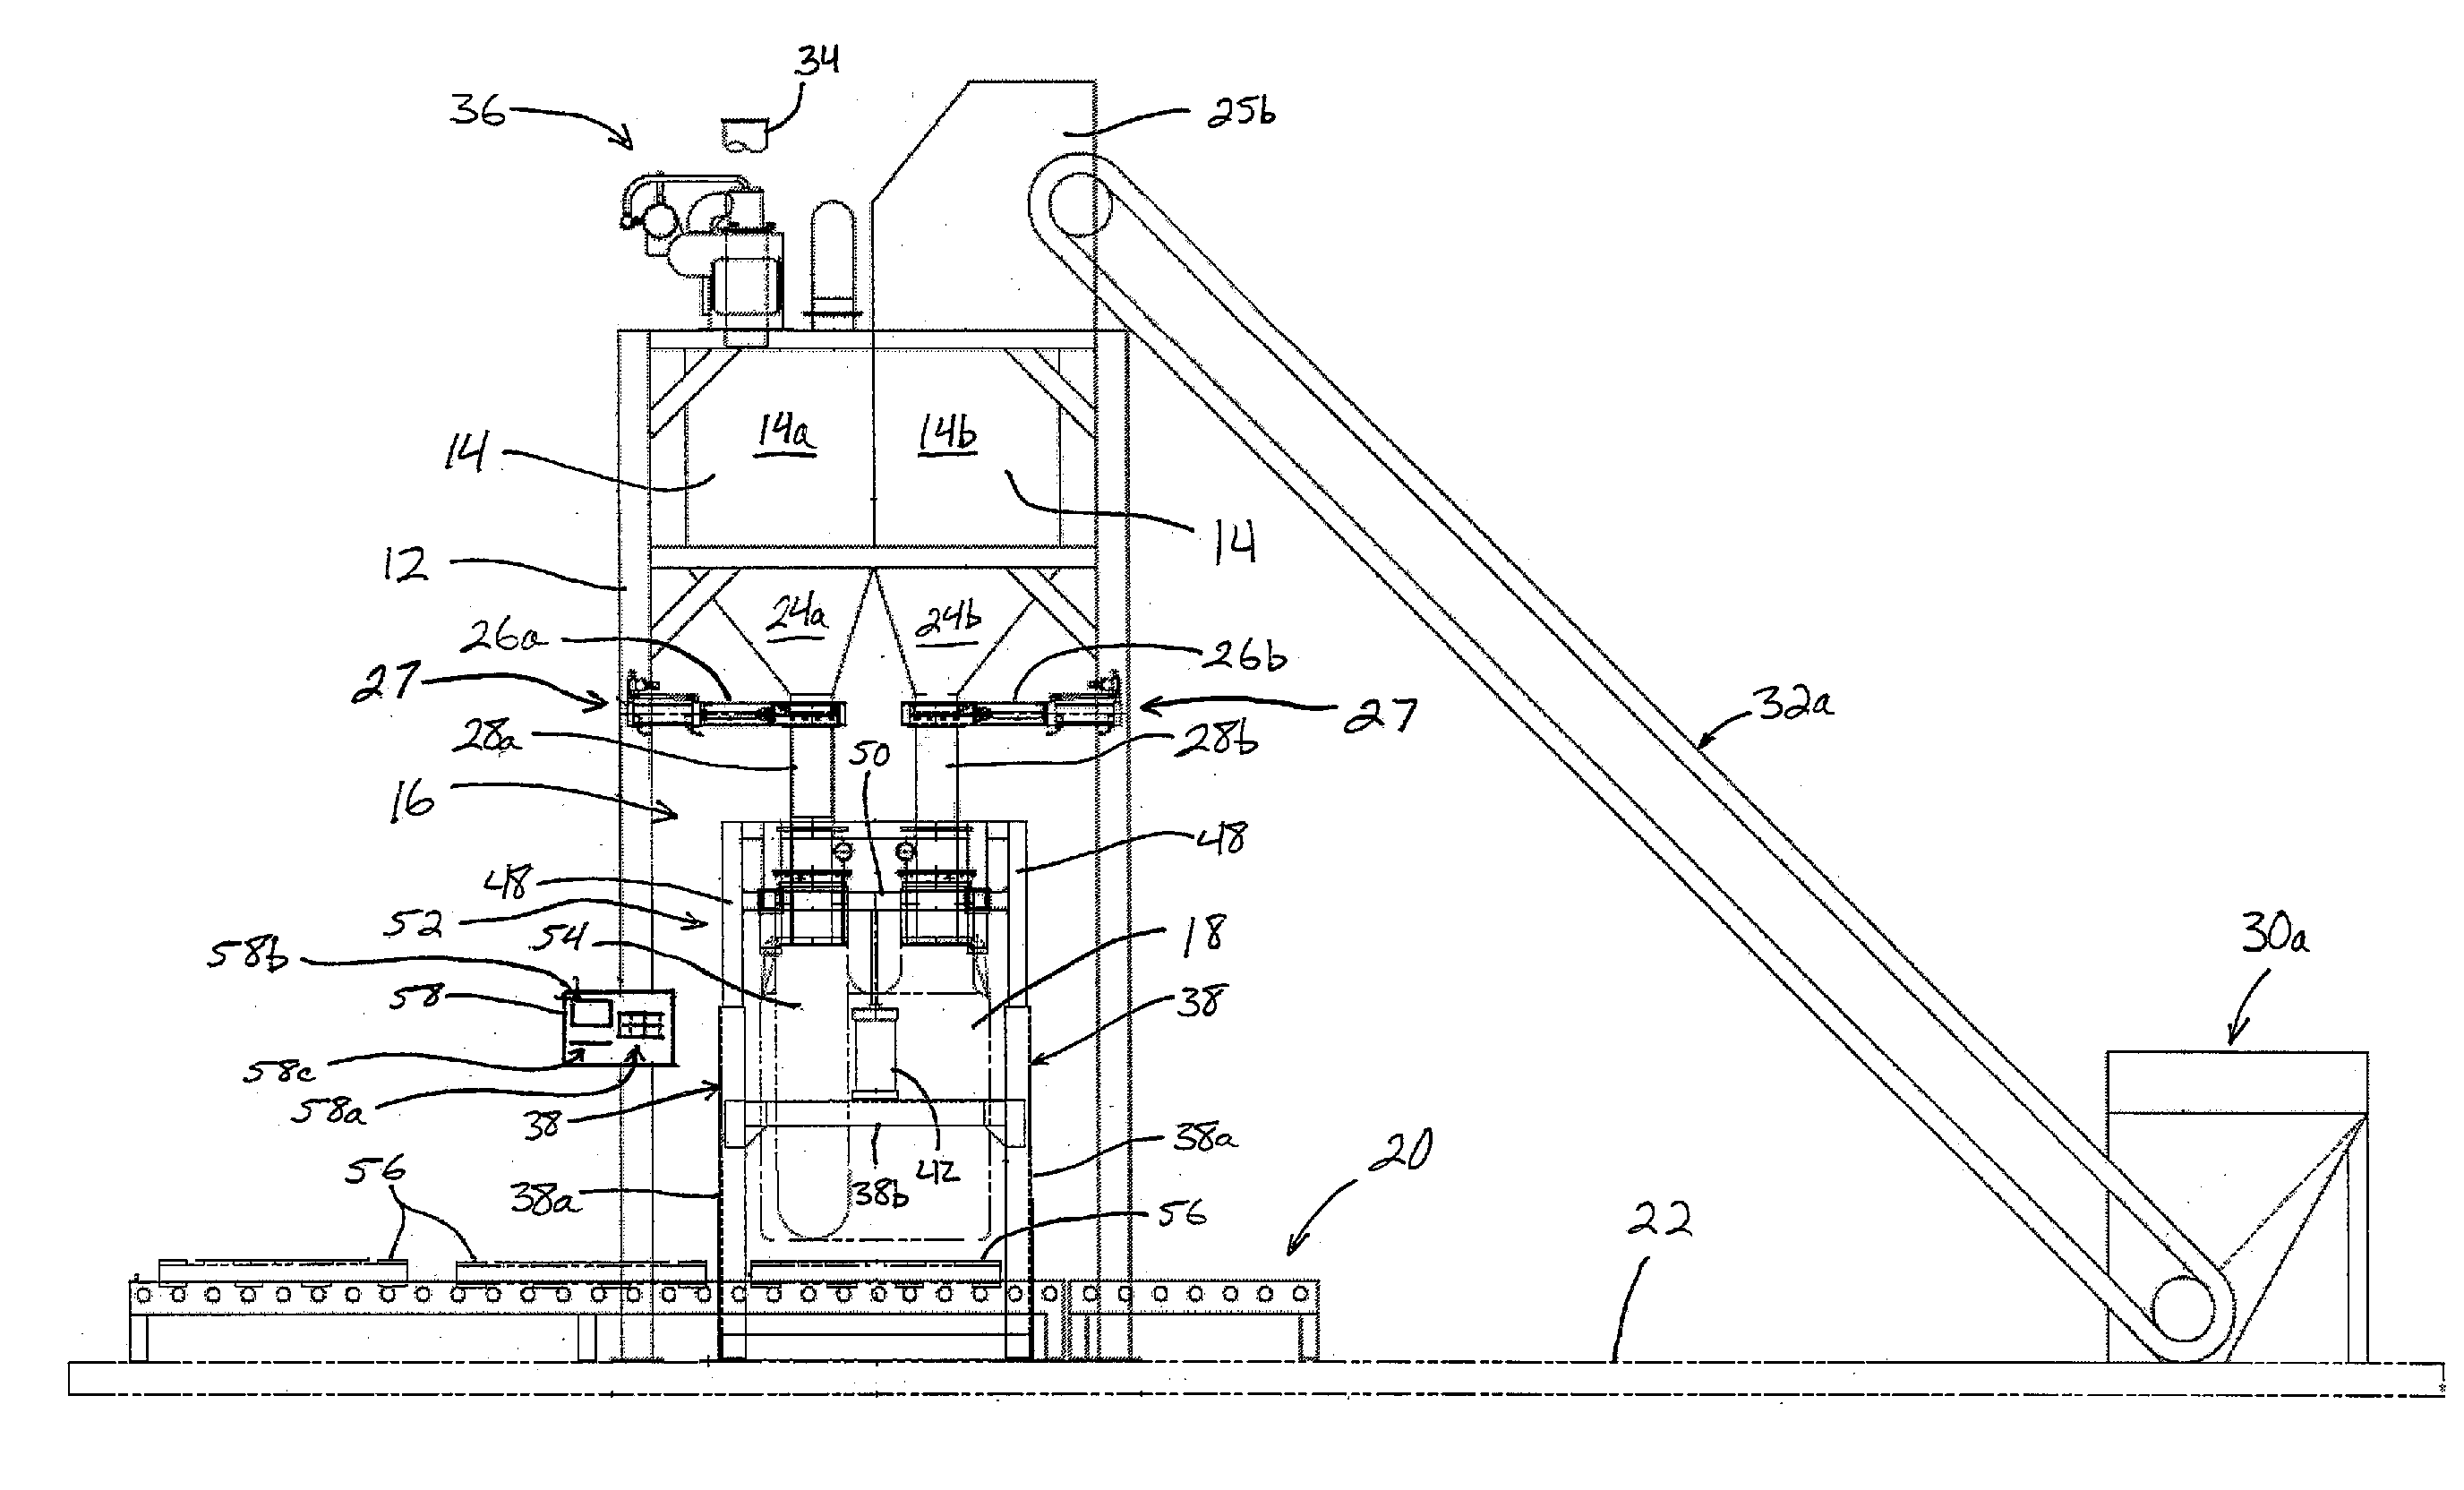 Apparatus and method for filling multi-chamber containers with bulk materials